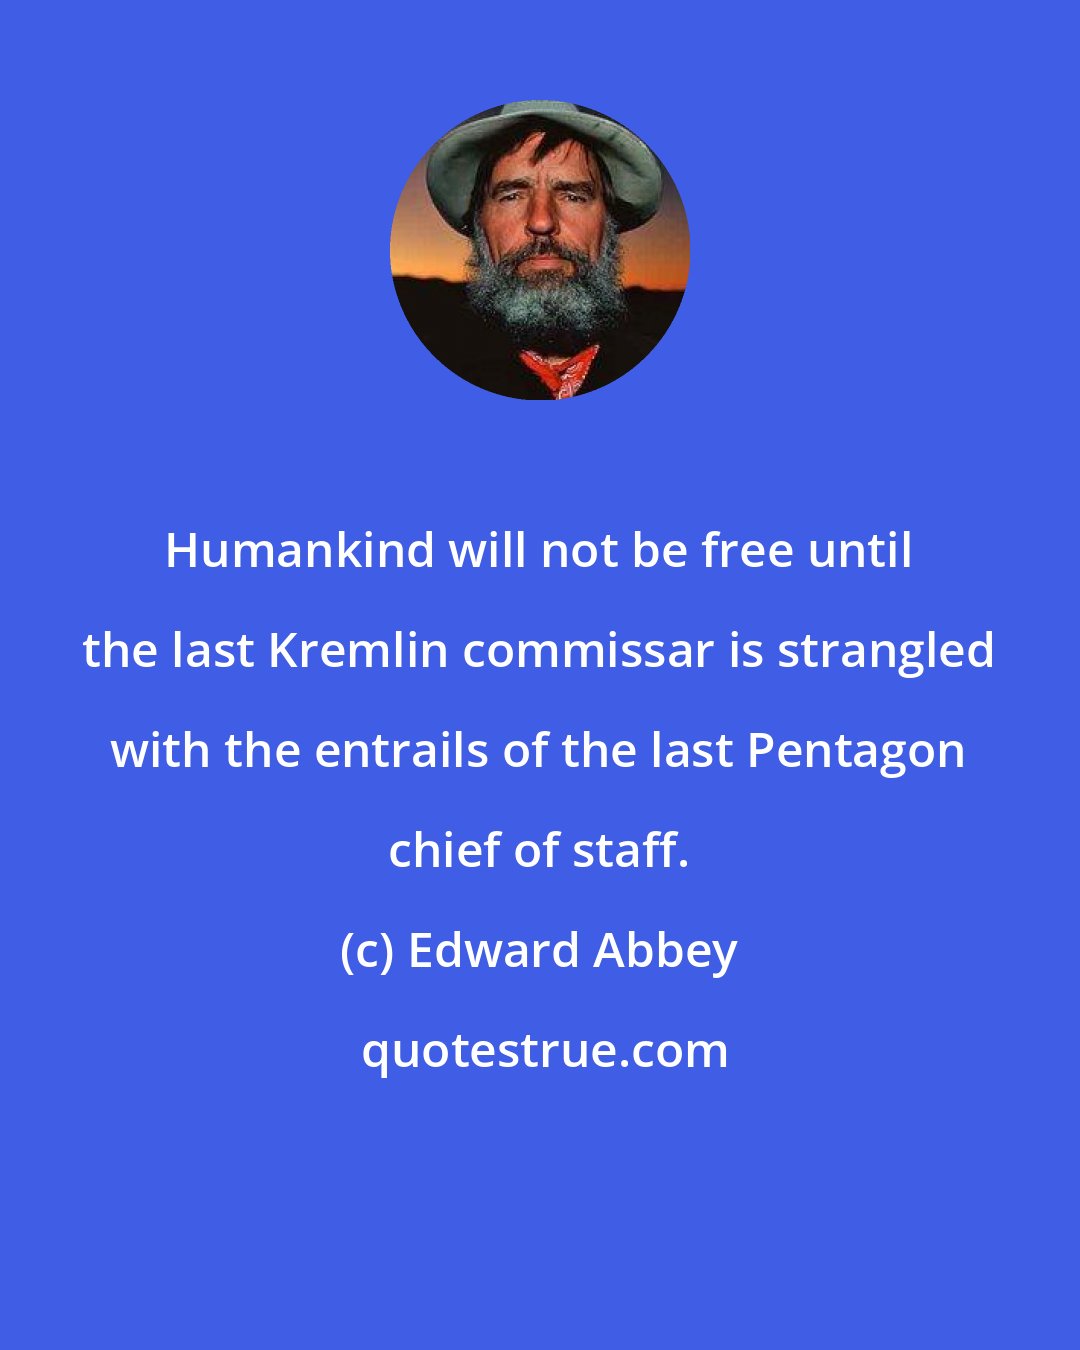 Edward Abbey: Humankind will not be free until the last Kremlin commissar is strangled with the entrails of the last Pentagon chief of staff.